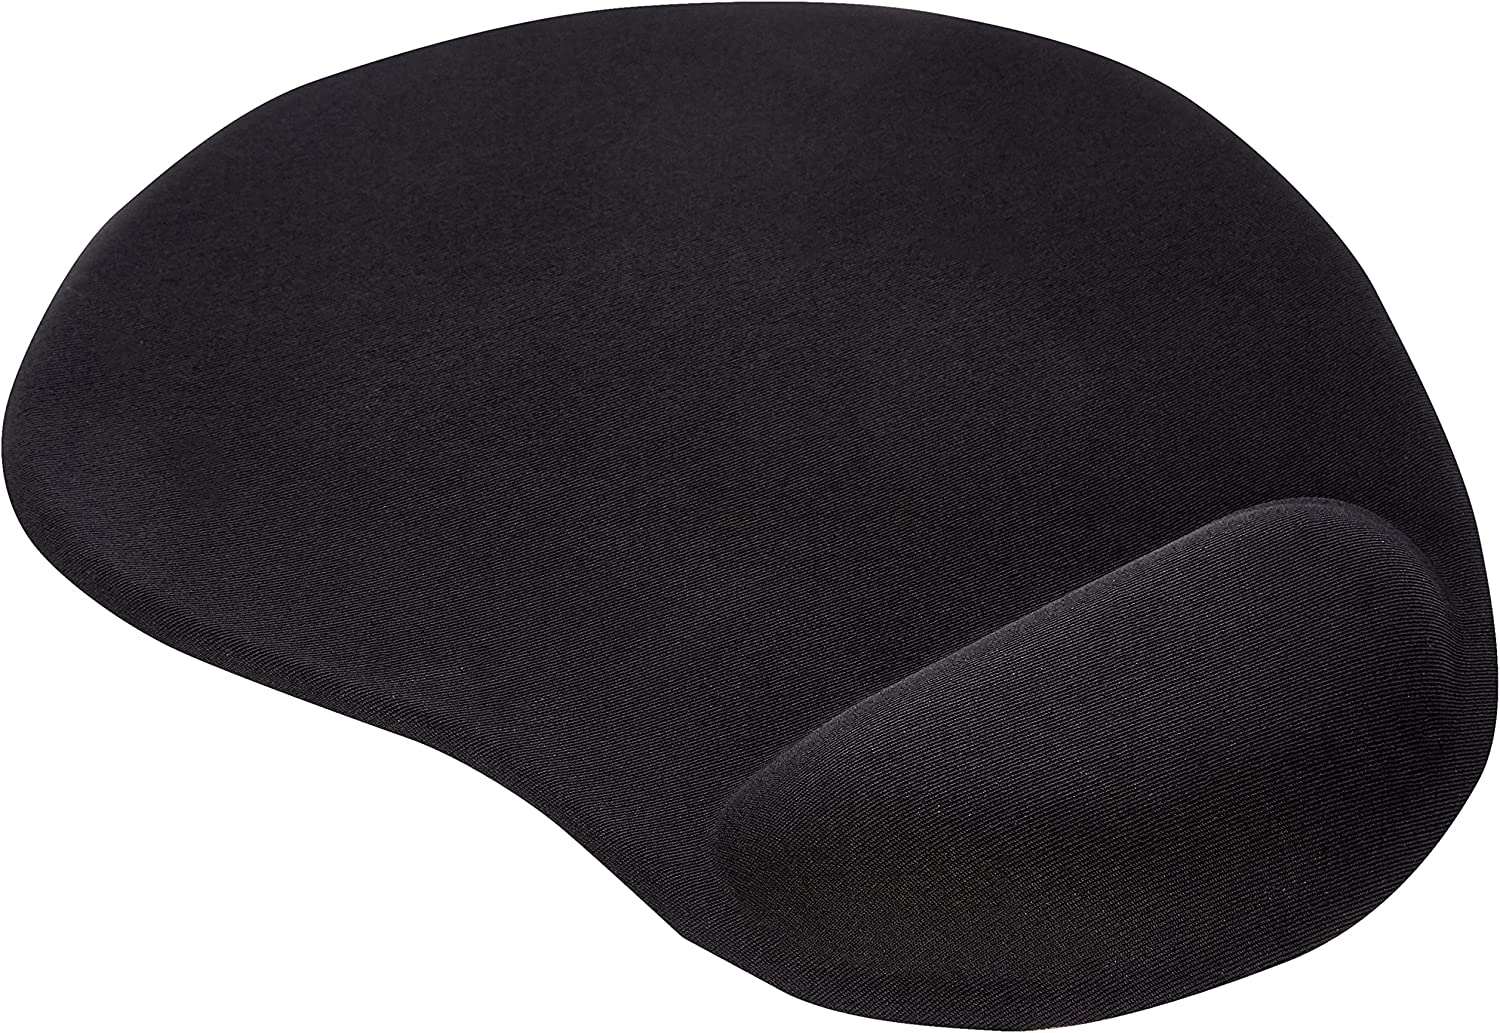 Ednet Mouse Pad with Gel Wrist Rest